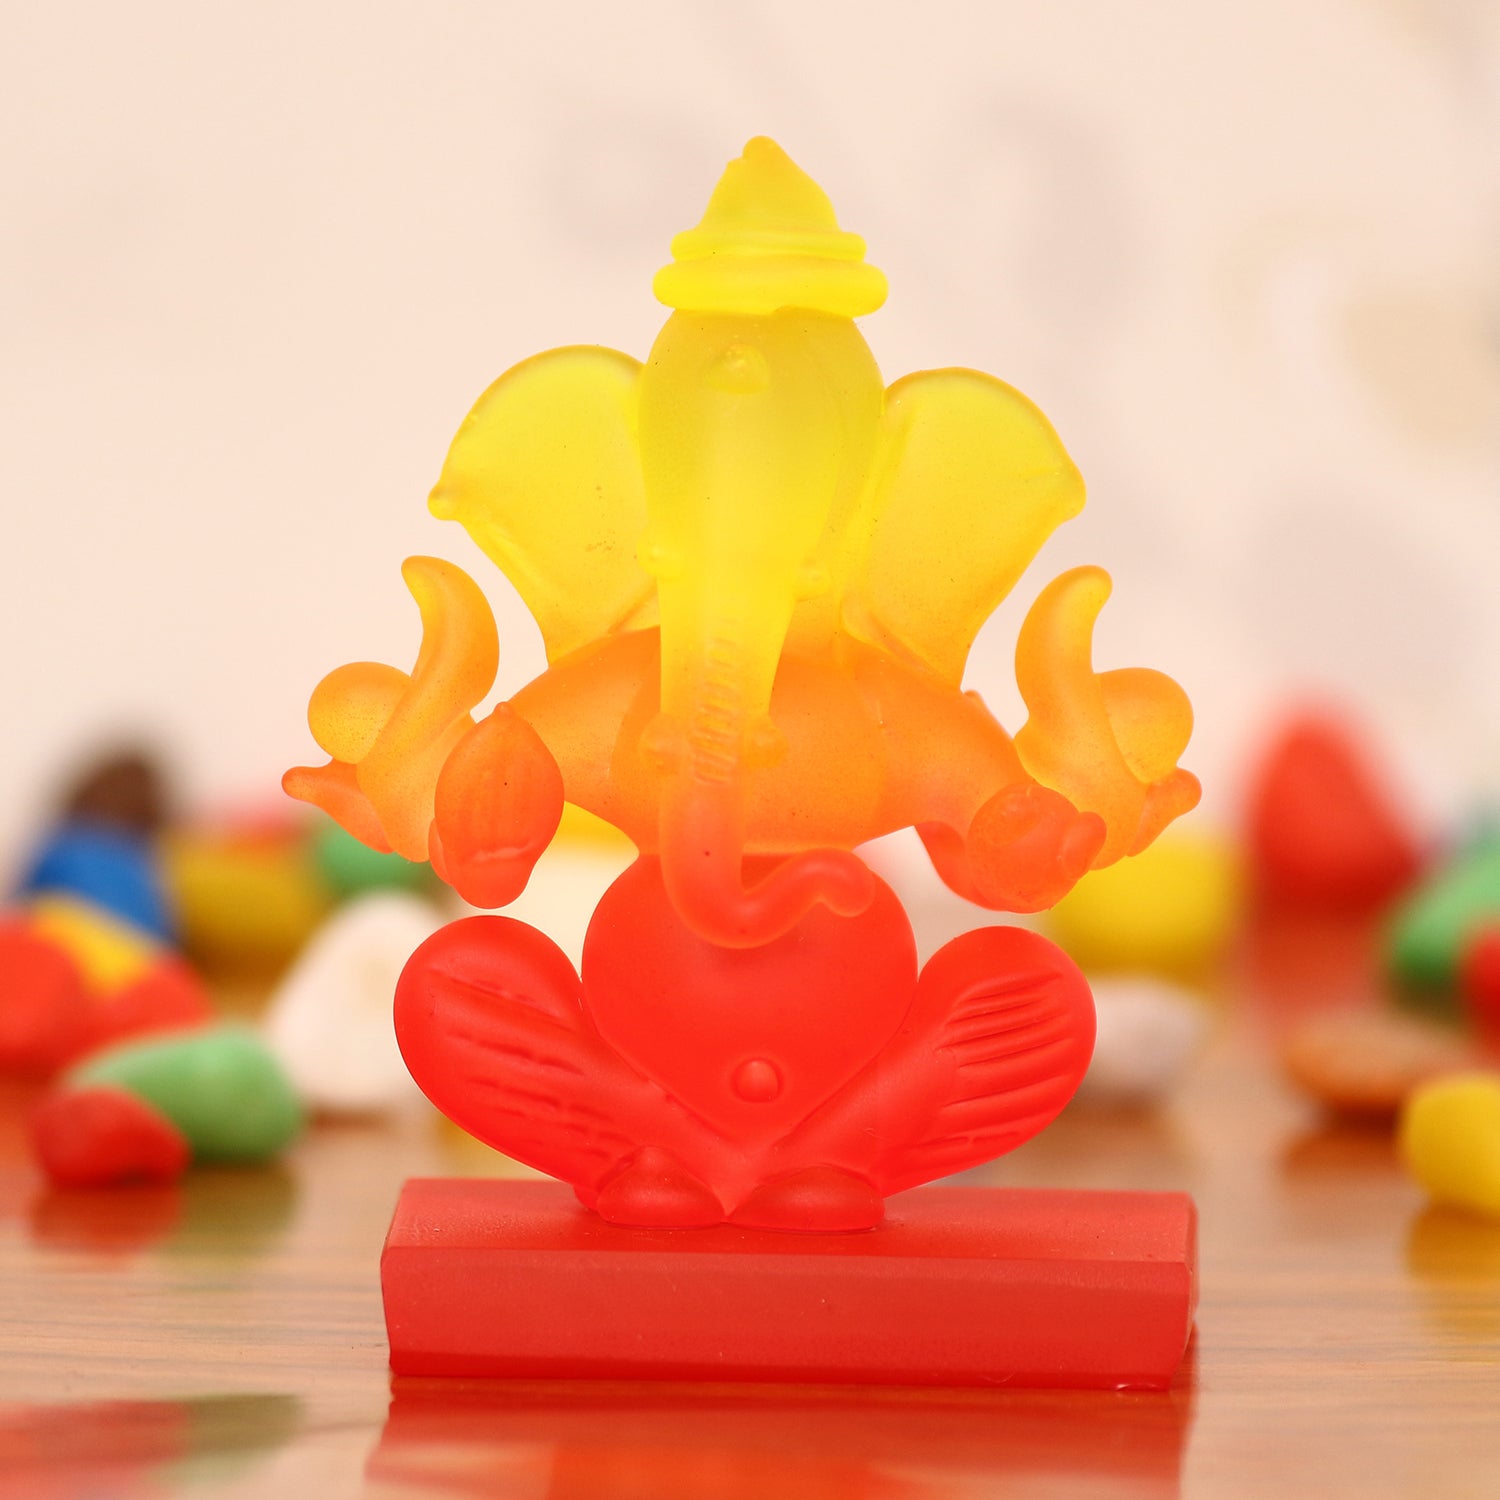 Yellow and Red Transparent Double Sided Crystal Ganesha Idol For Home, Office and Car Dashboard 1